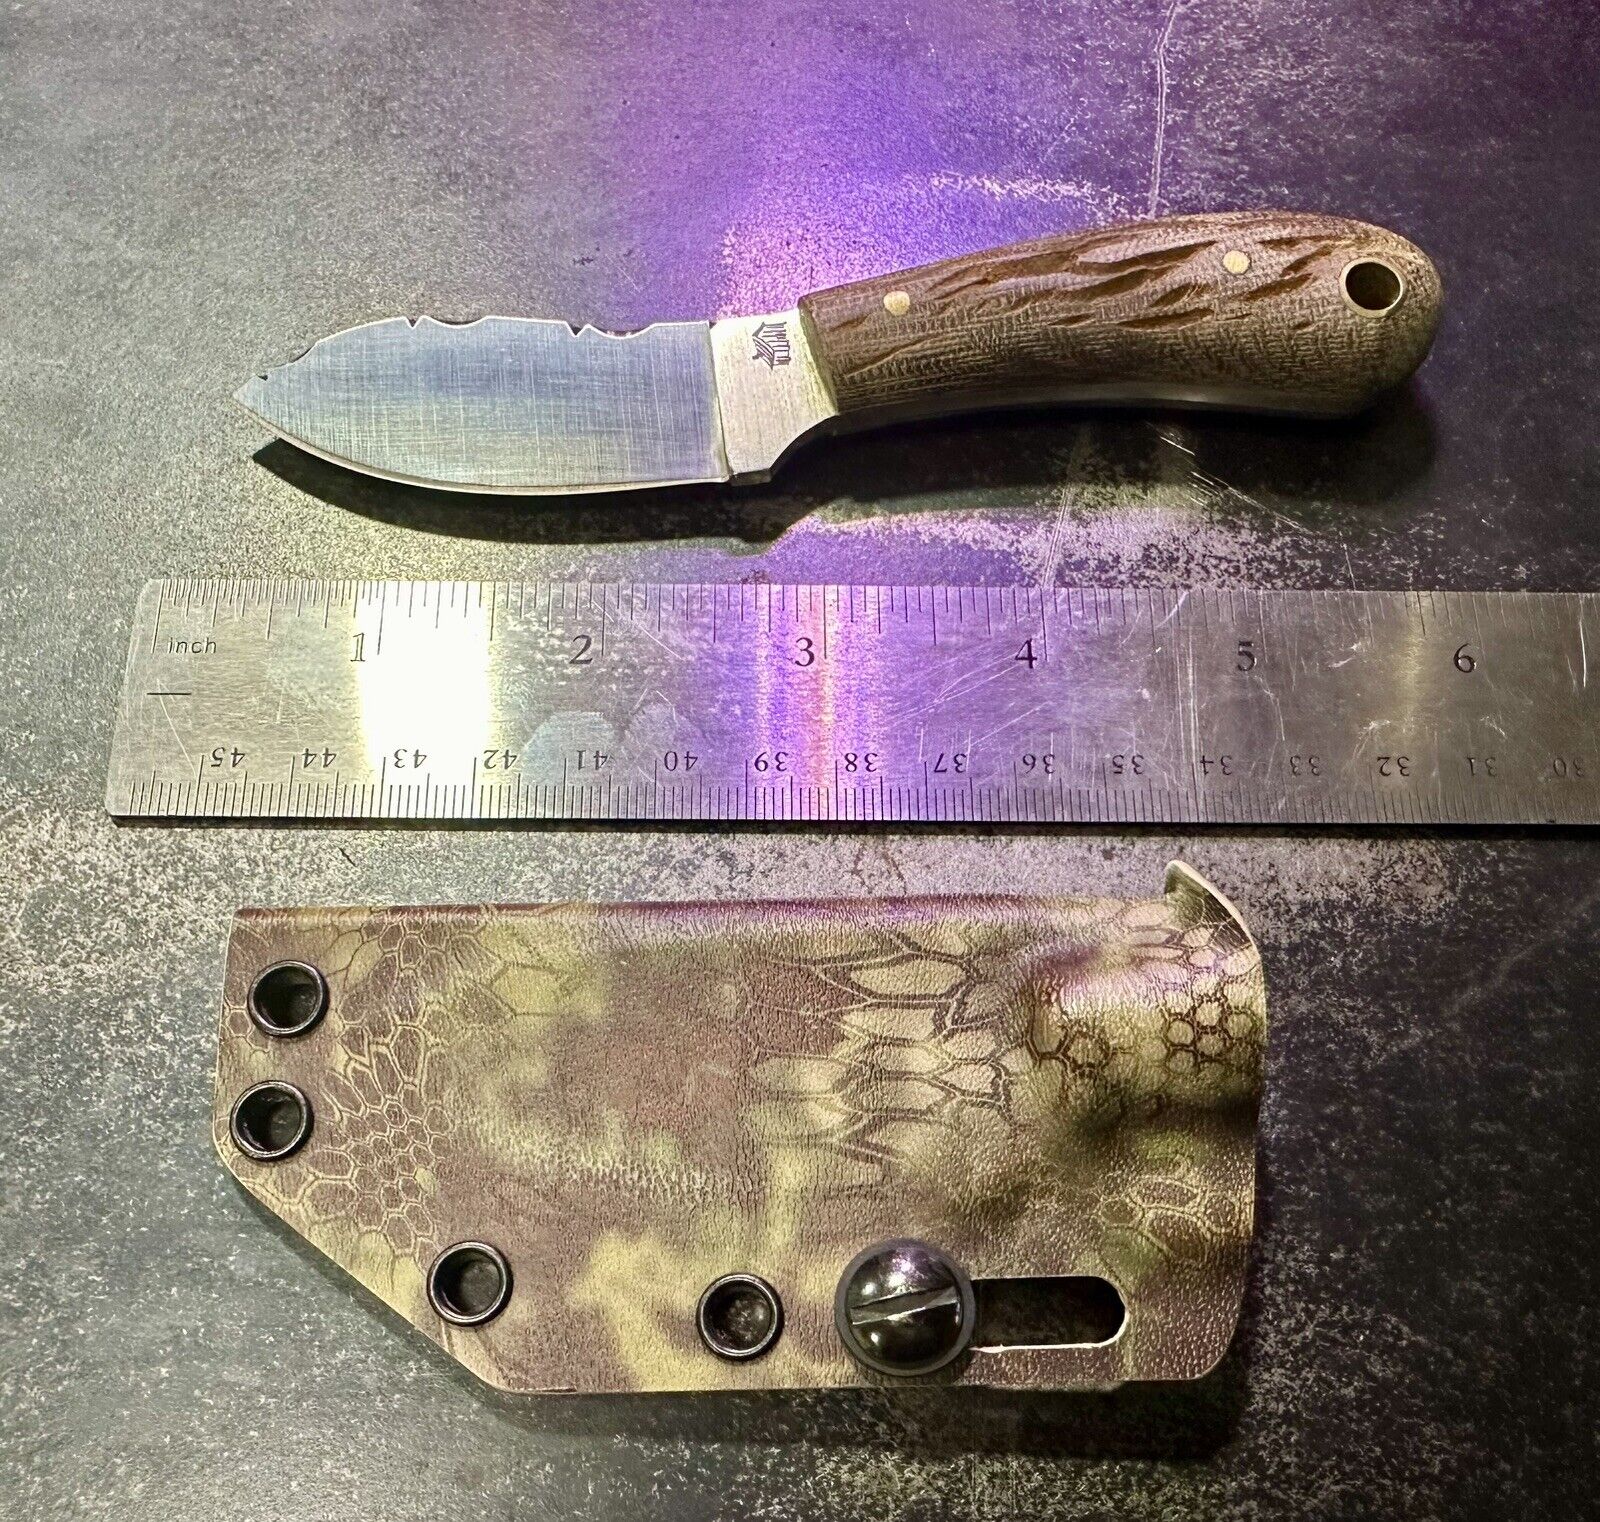 LT Wright Knife  Lil Muk EDC Fixed Blades Camping Survival 🔥CUSTOM🔥 File Work